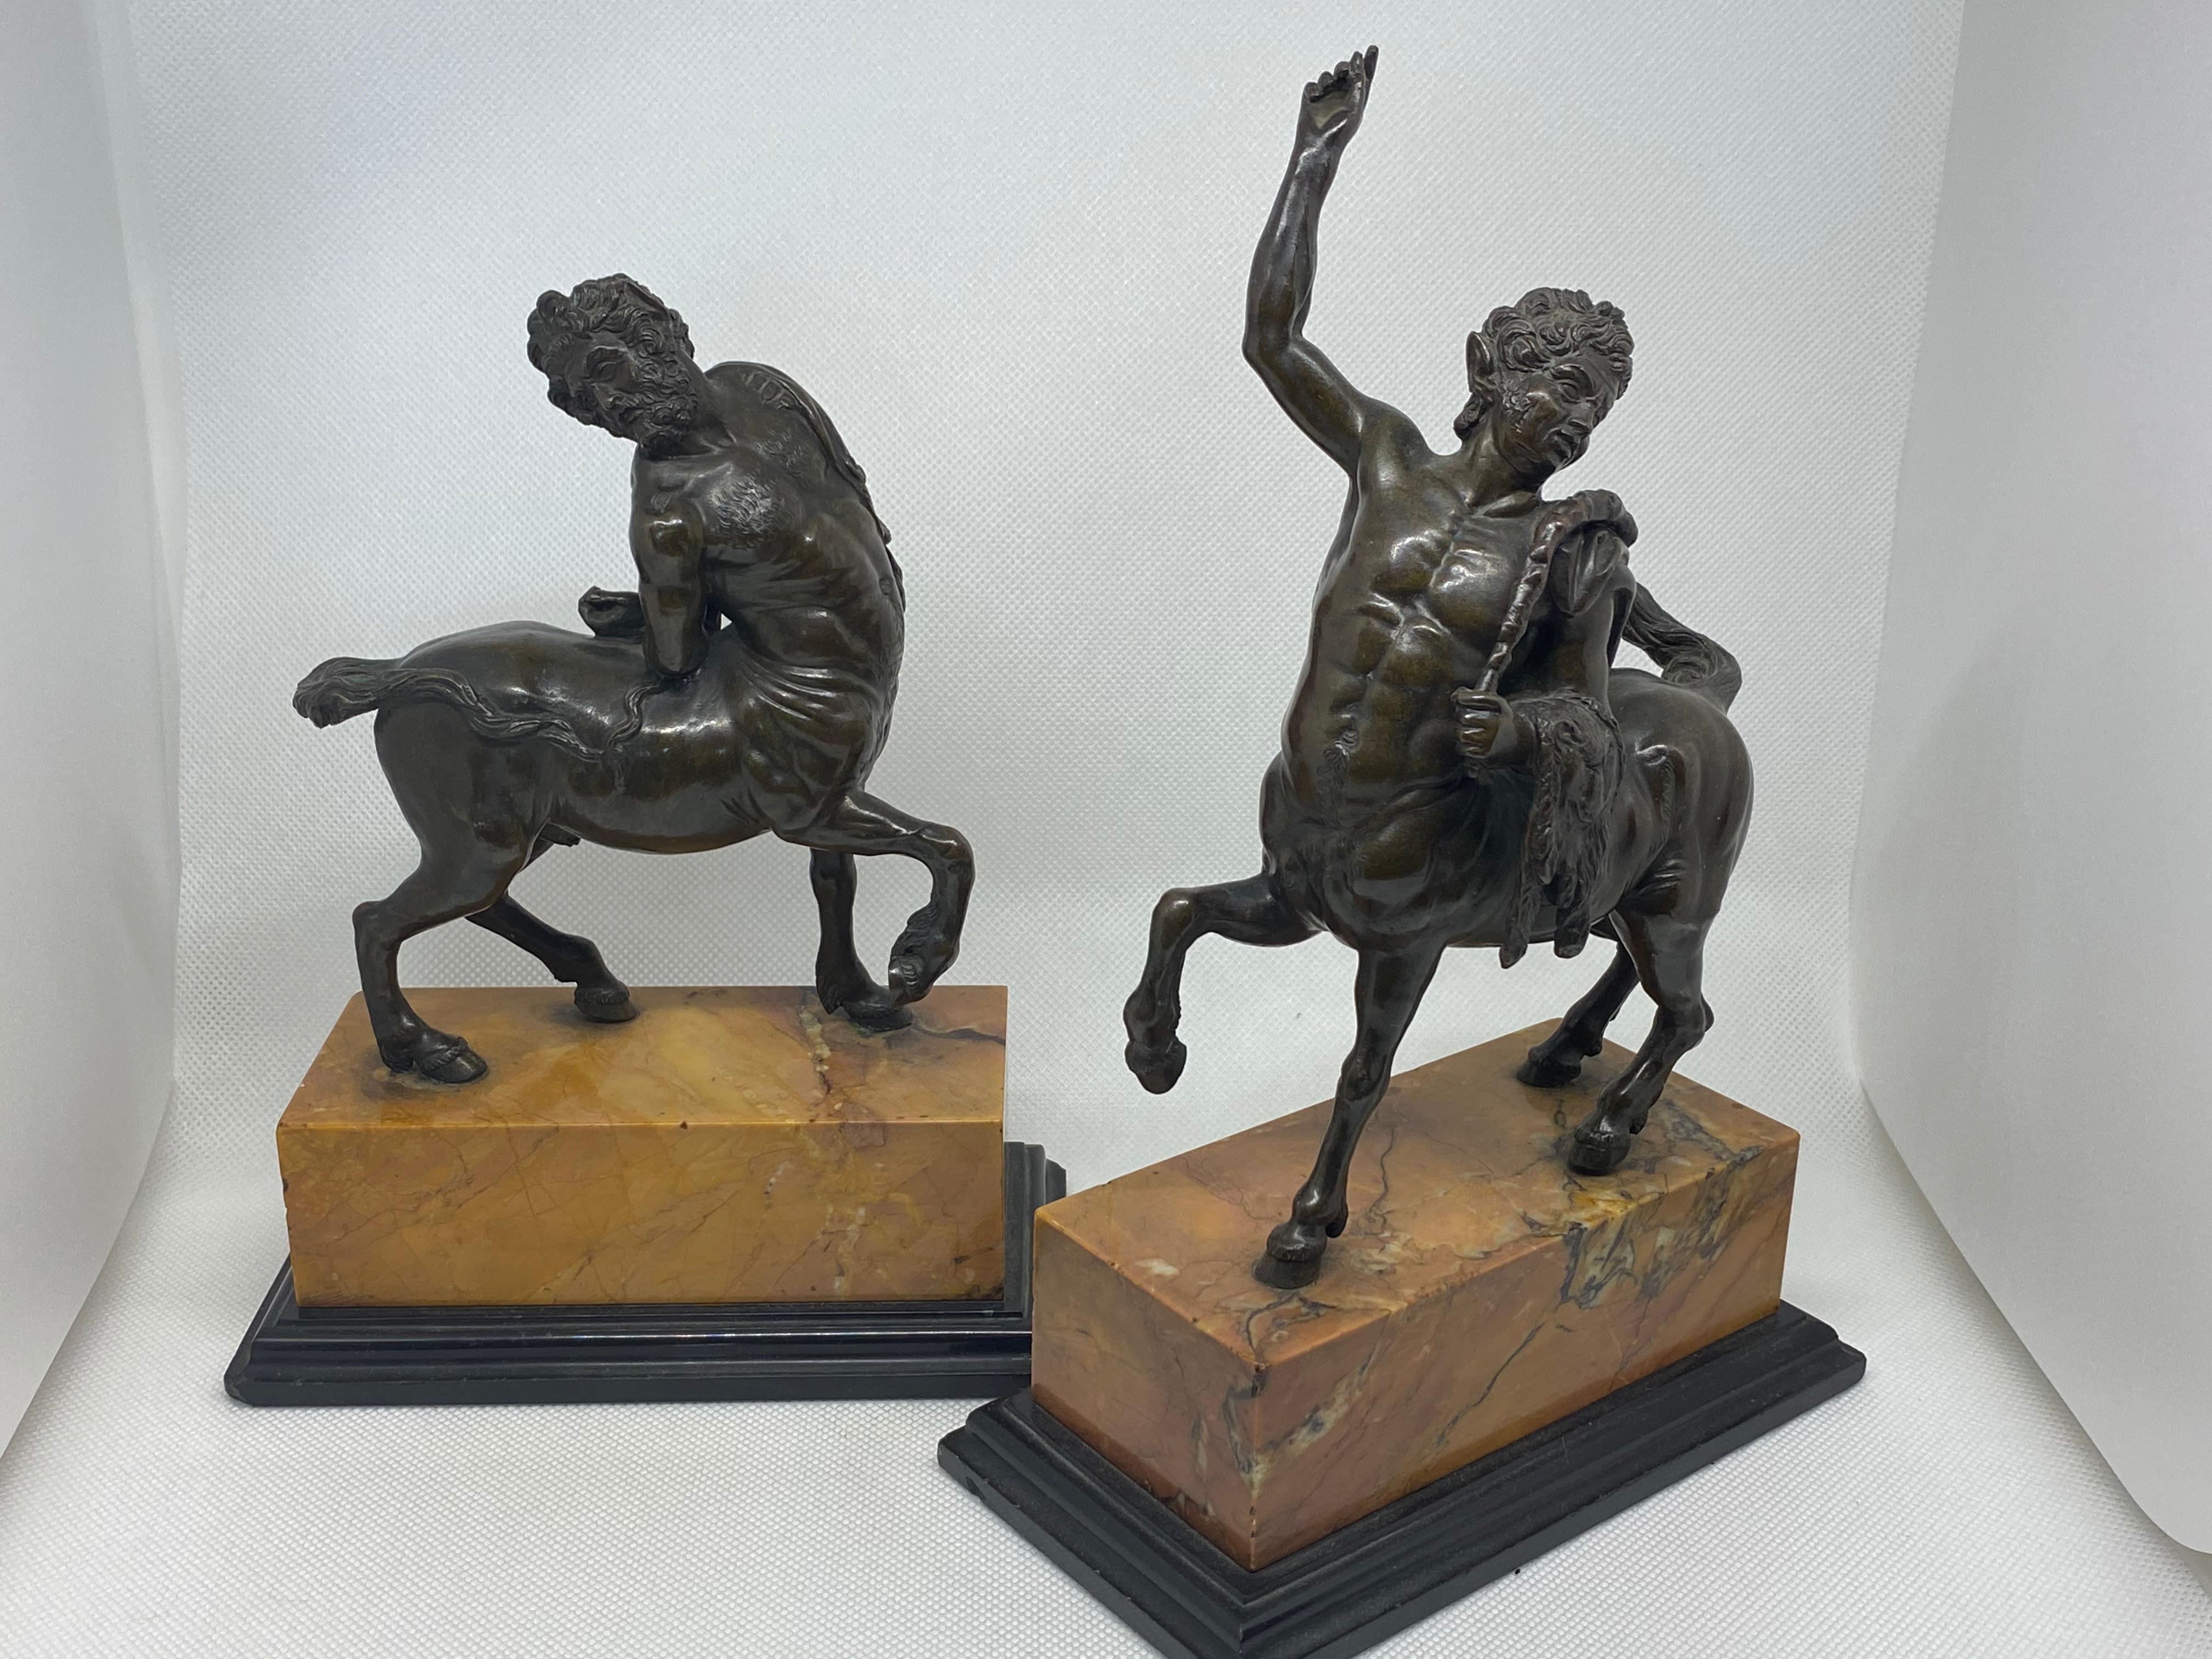 Very finely cast bronze copies of the Furietti Centaurs, one depicting a young centaur and the other depicting and old centaur. They are each mounted on a marble base and are unsigned. These bronzes are 19th century copies of the two Roman (or